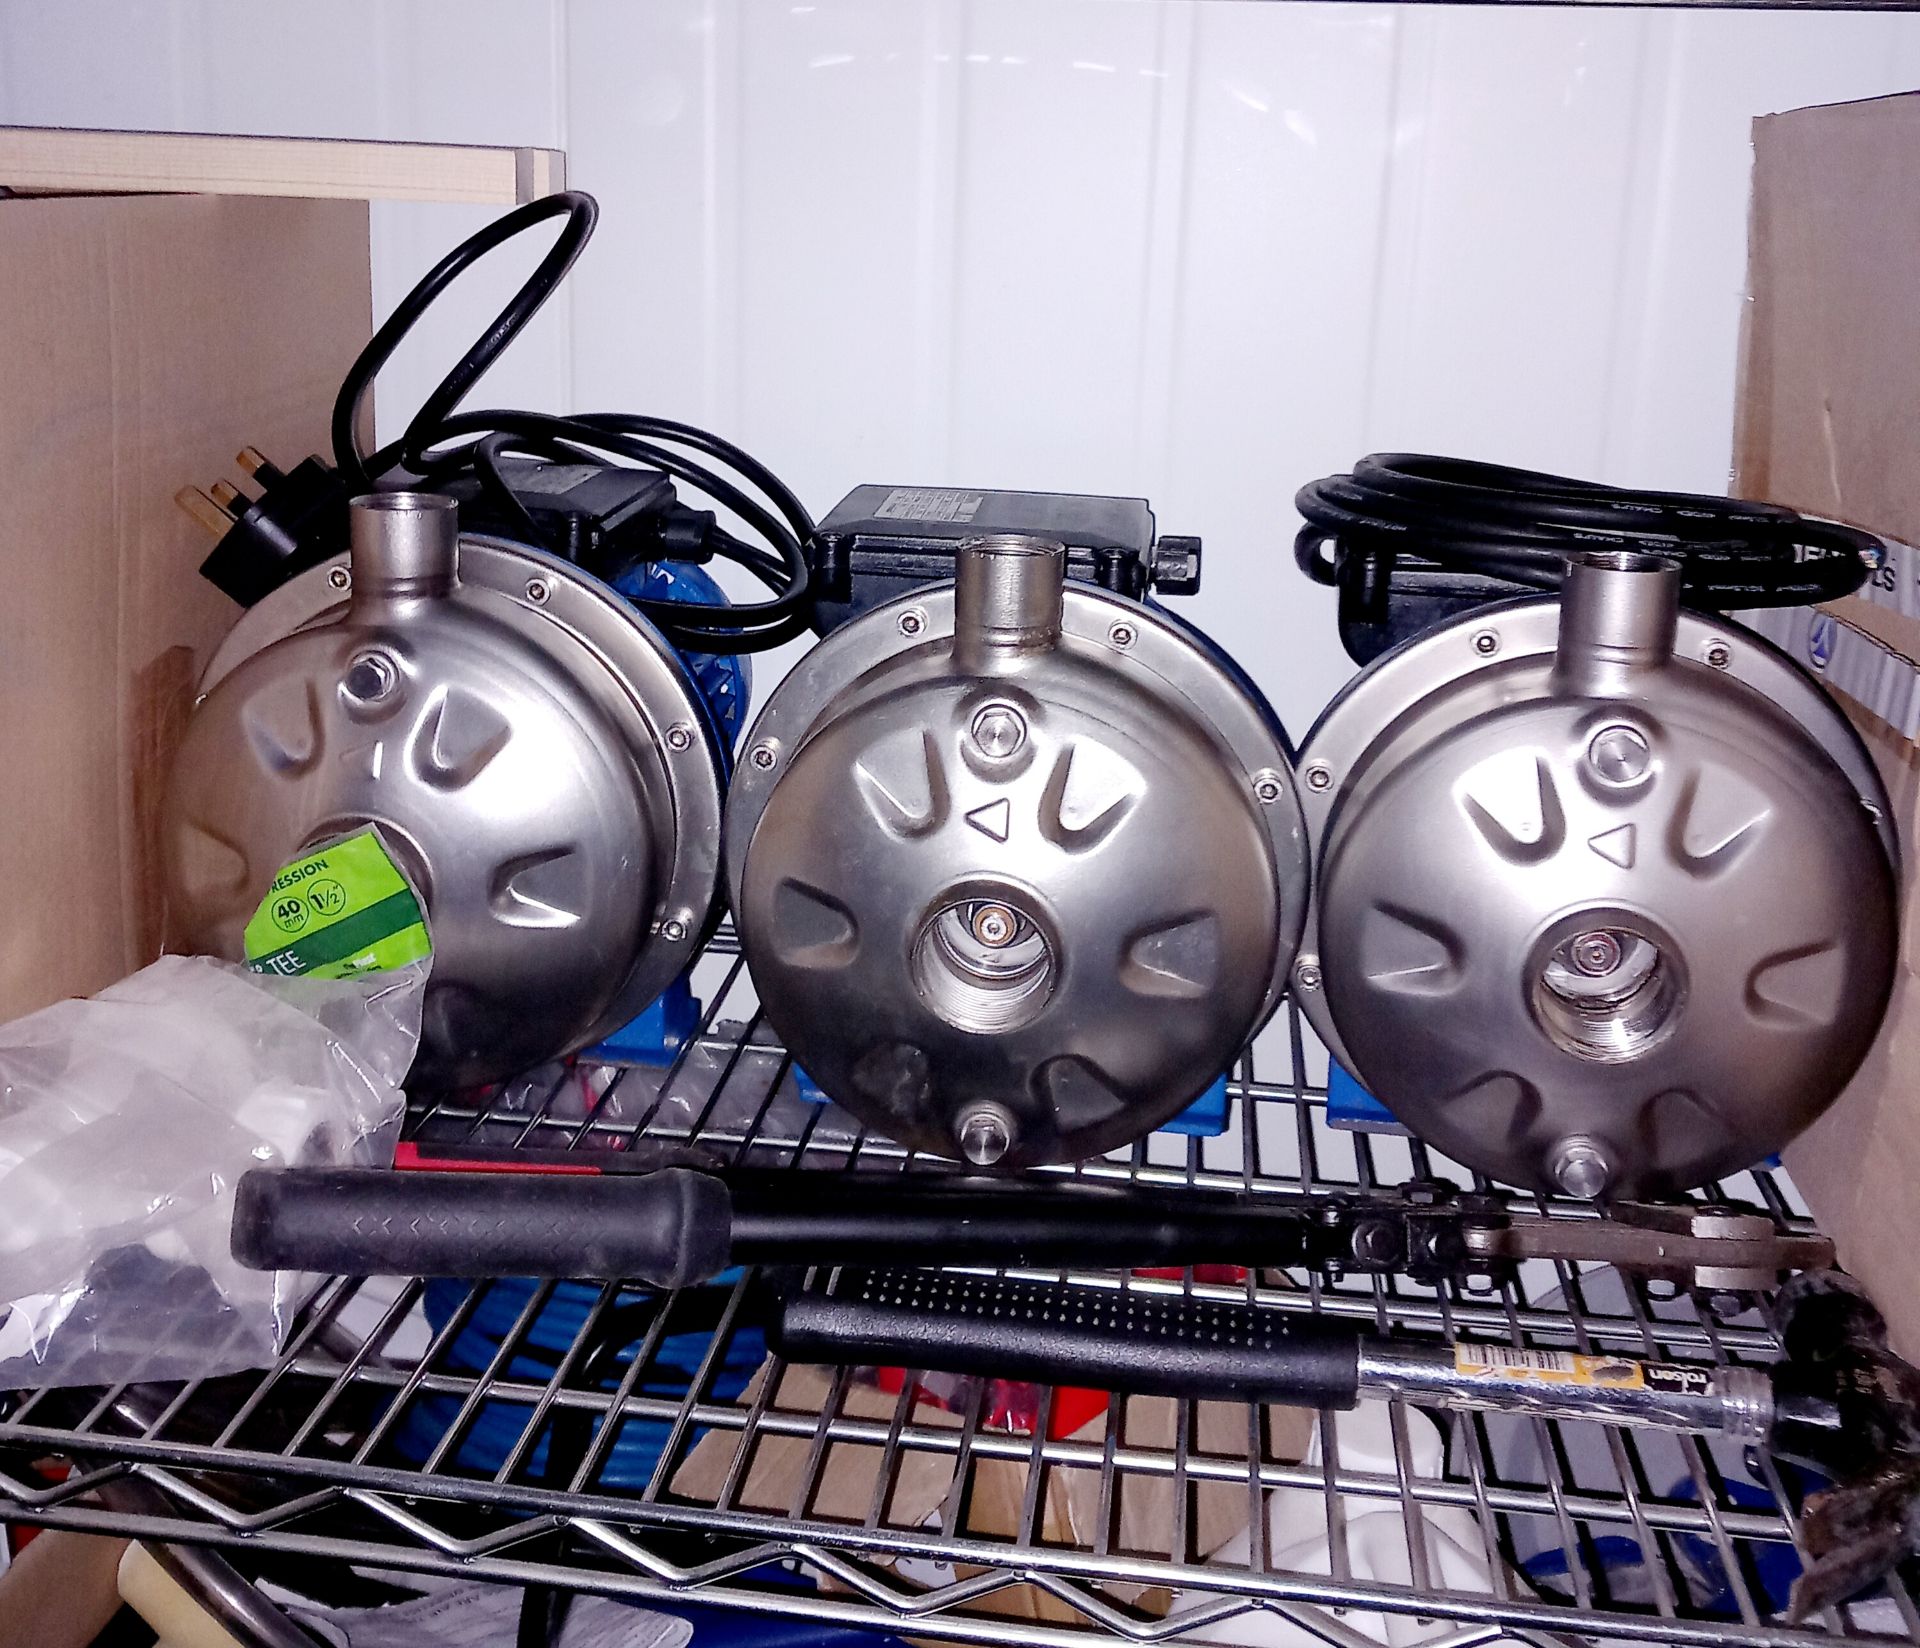 3 x New Brewhouse pumps & various fittings & adjustable wire rack - Image 2 of 5